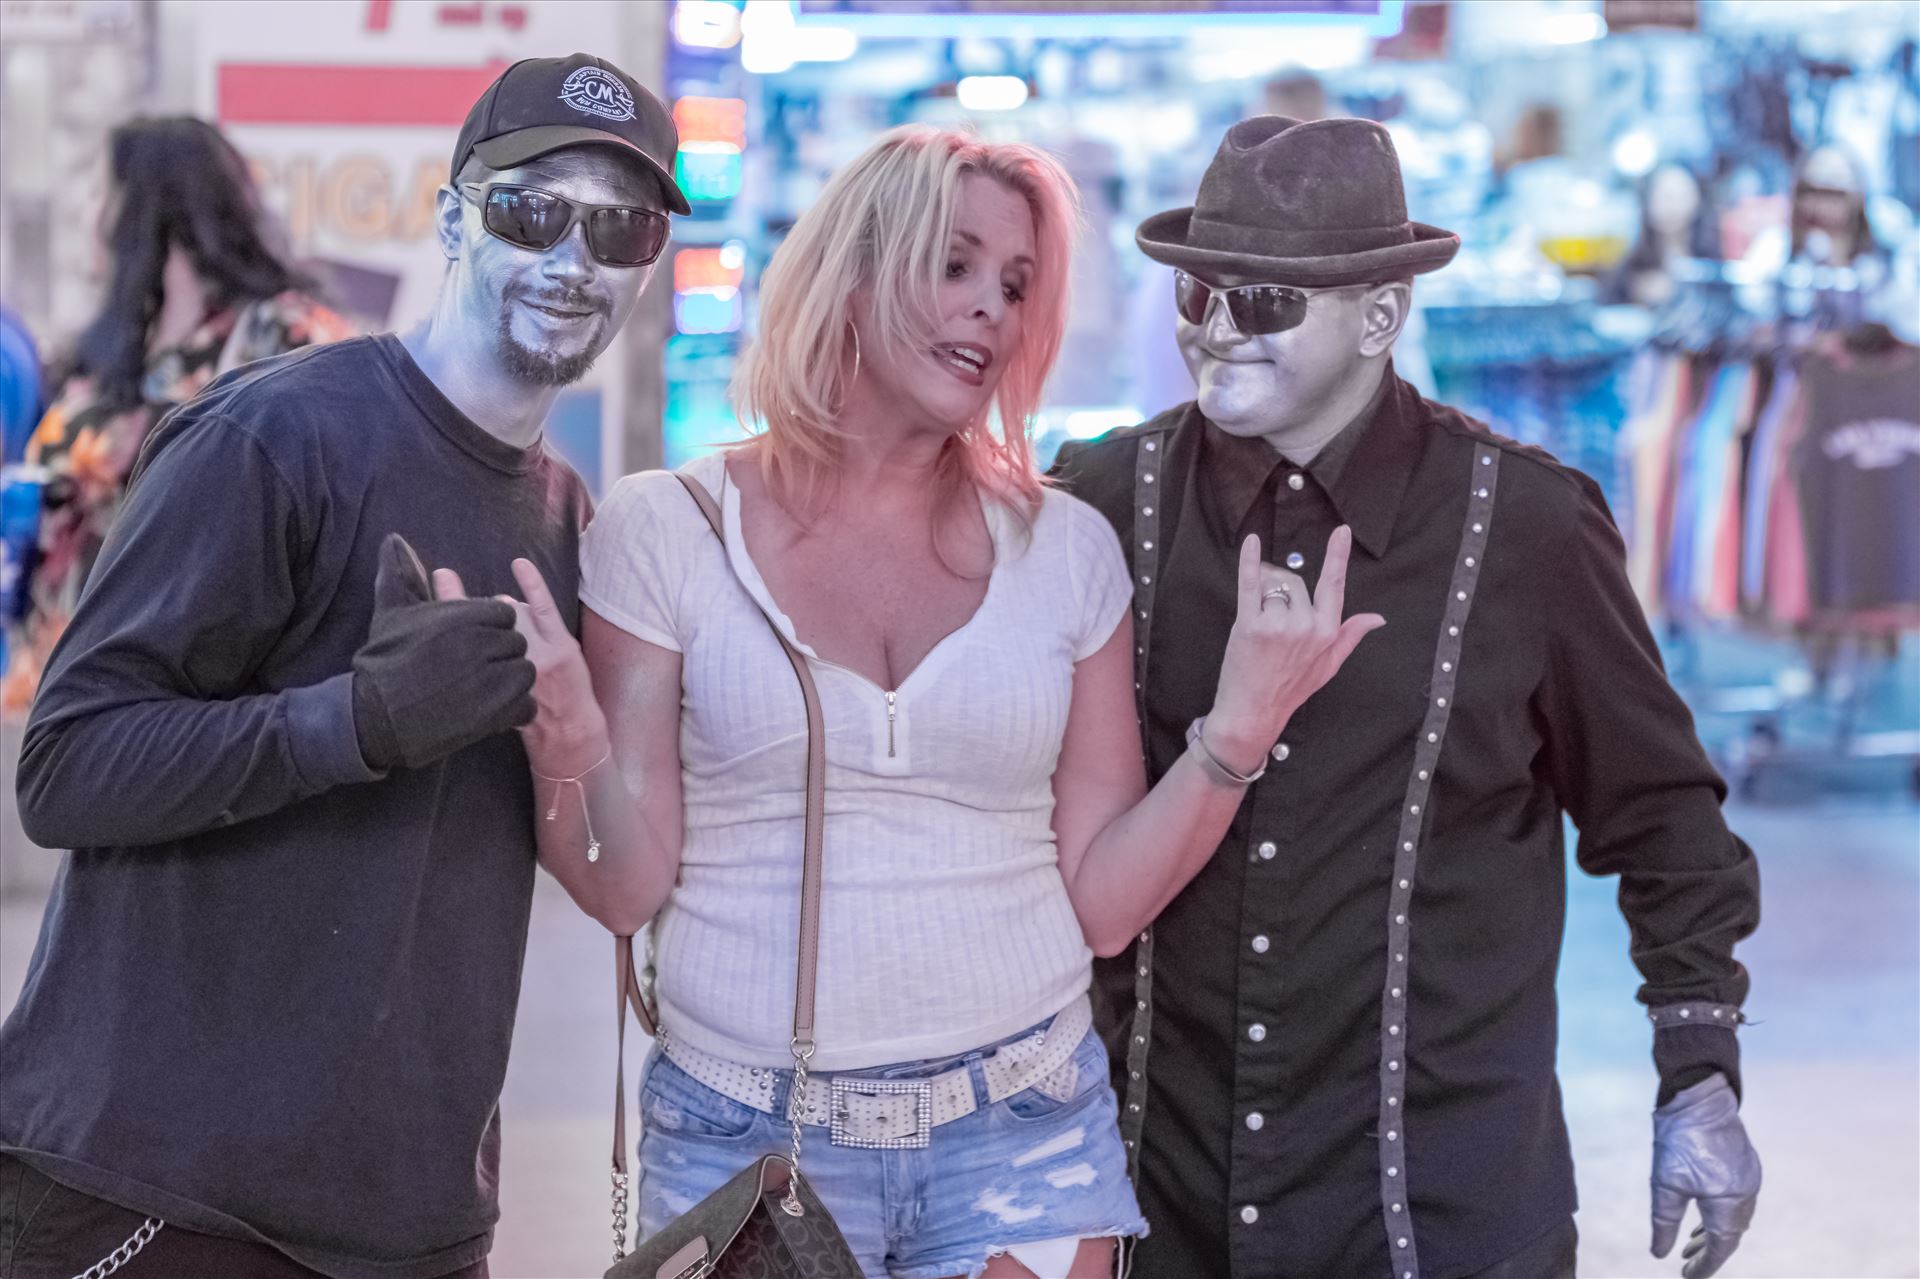 Fremont Street Experence with Tonya and make me move guys-8502636.jpg -  by Terry Kelly Photography